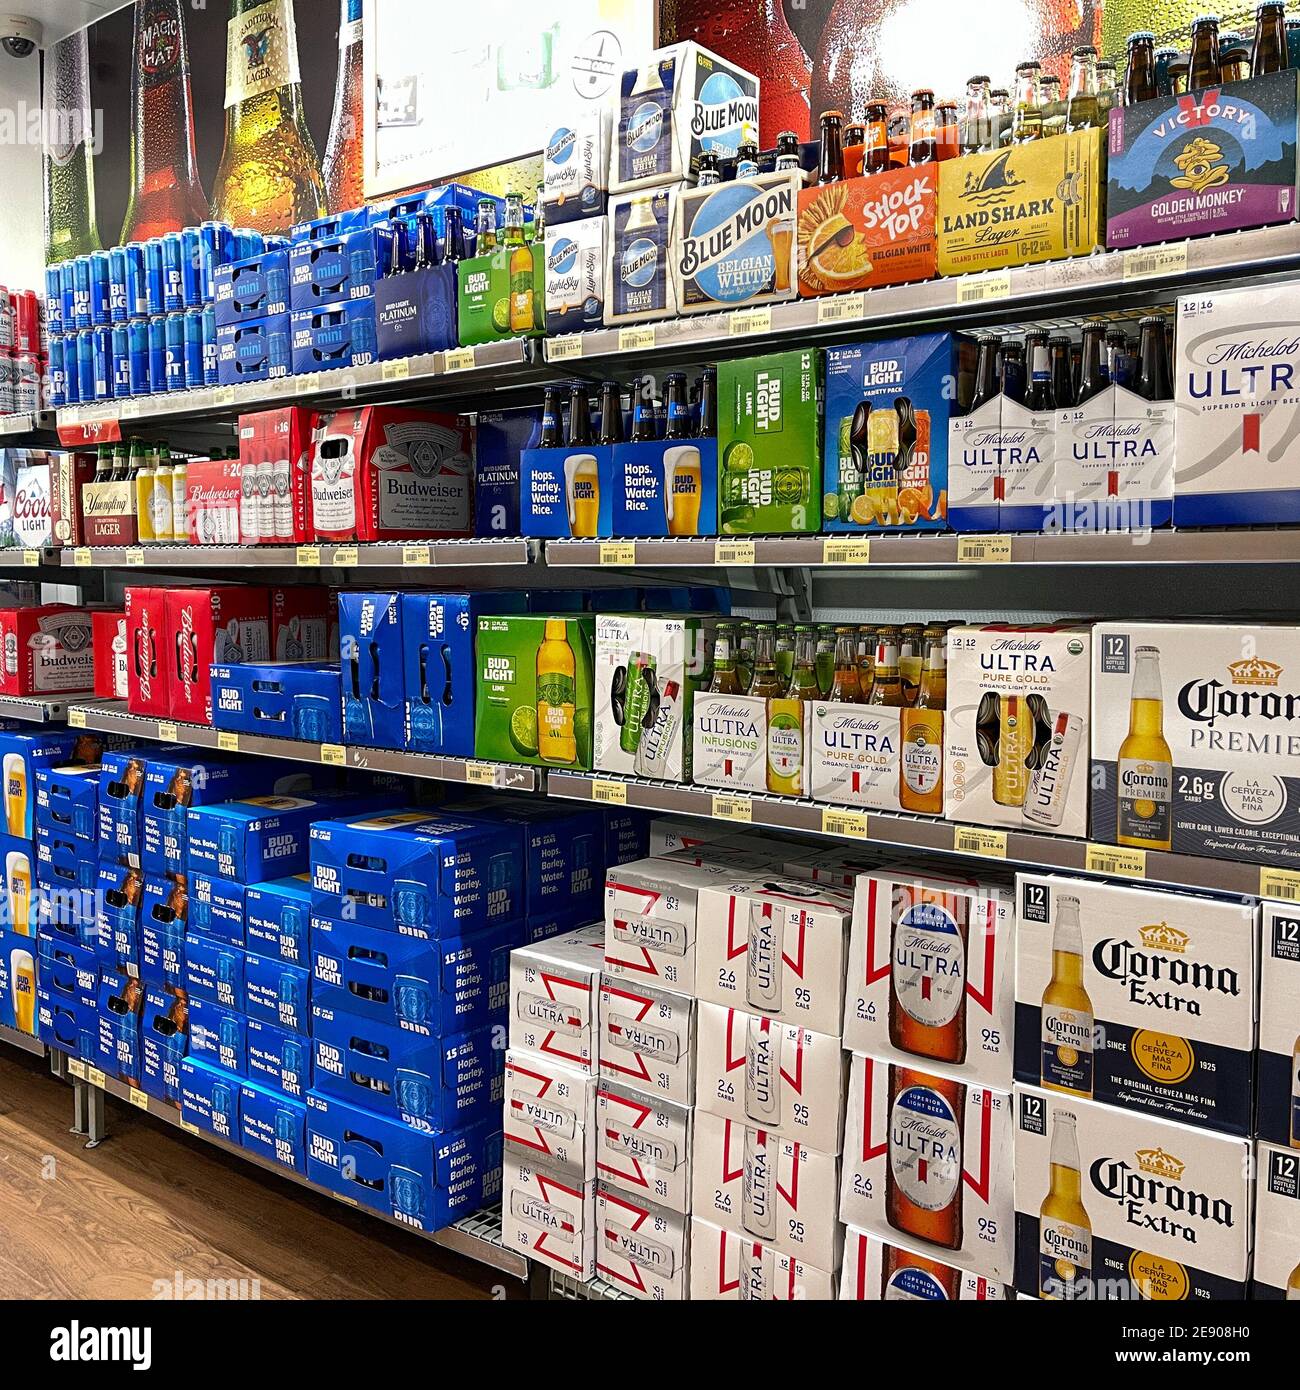 Orlando,FL USA - January 26, 2021:  Cases of beer in a grocery store. Stock Photo